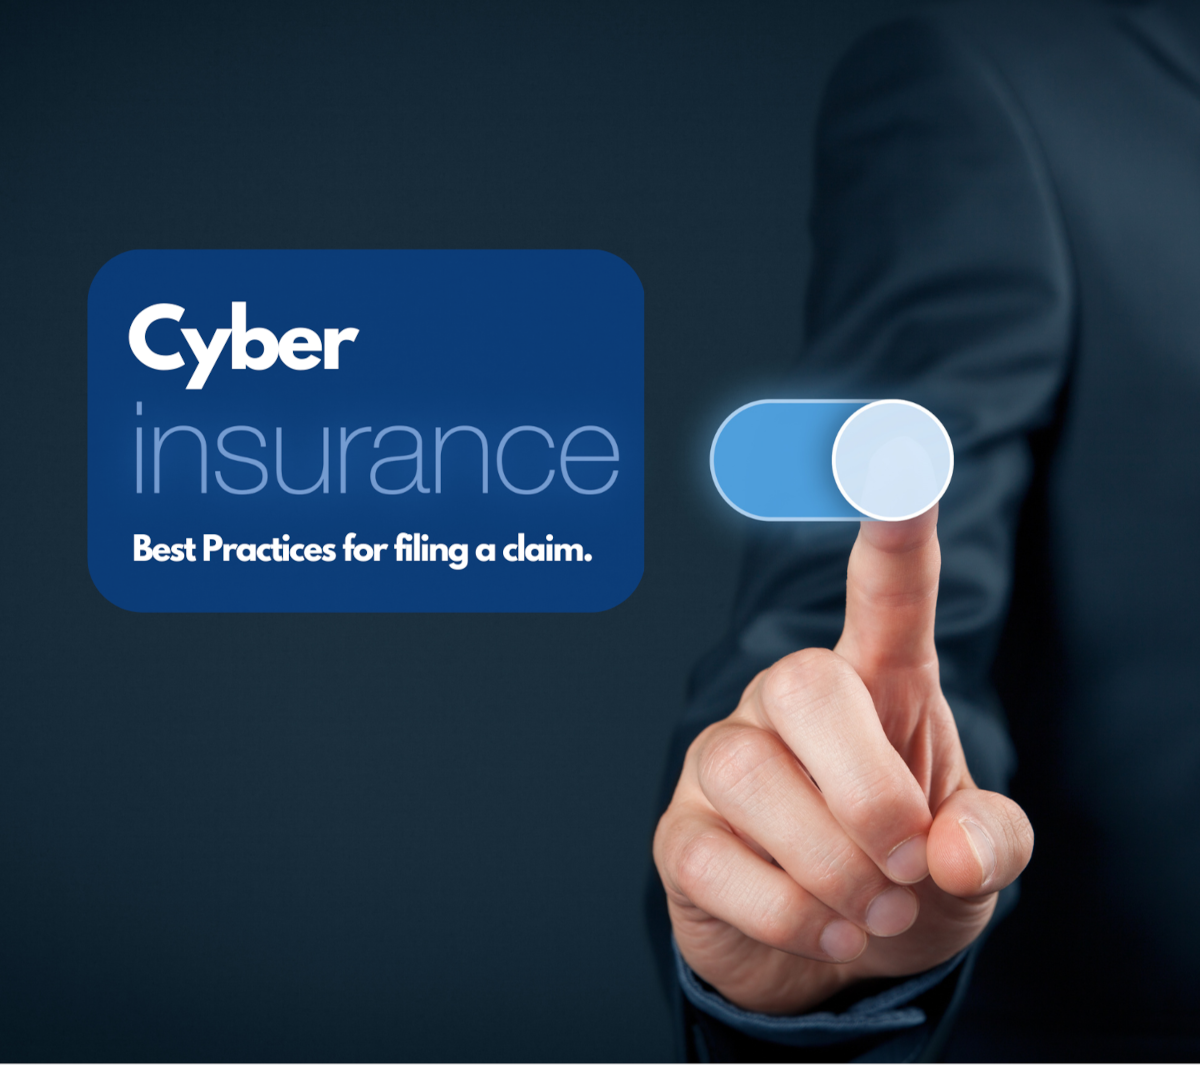 A hand touching sliding touch screen prompt next to the text 'Cyber insurance Best Practices for filing a claim.'